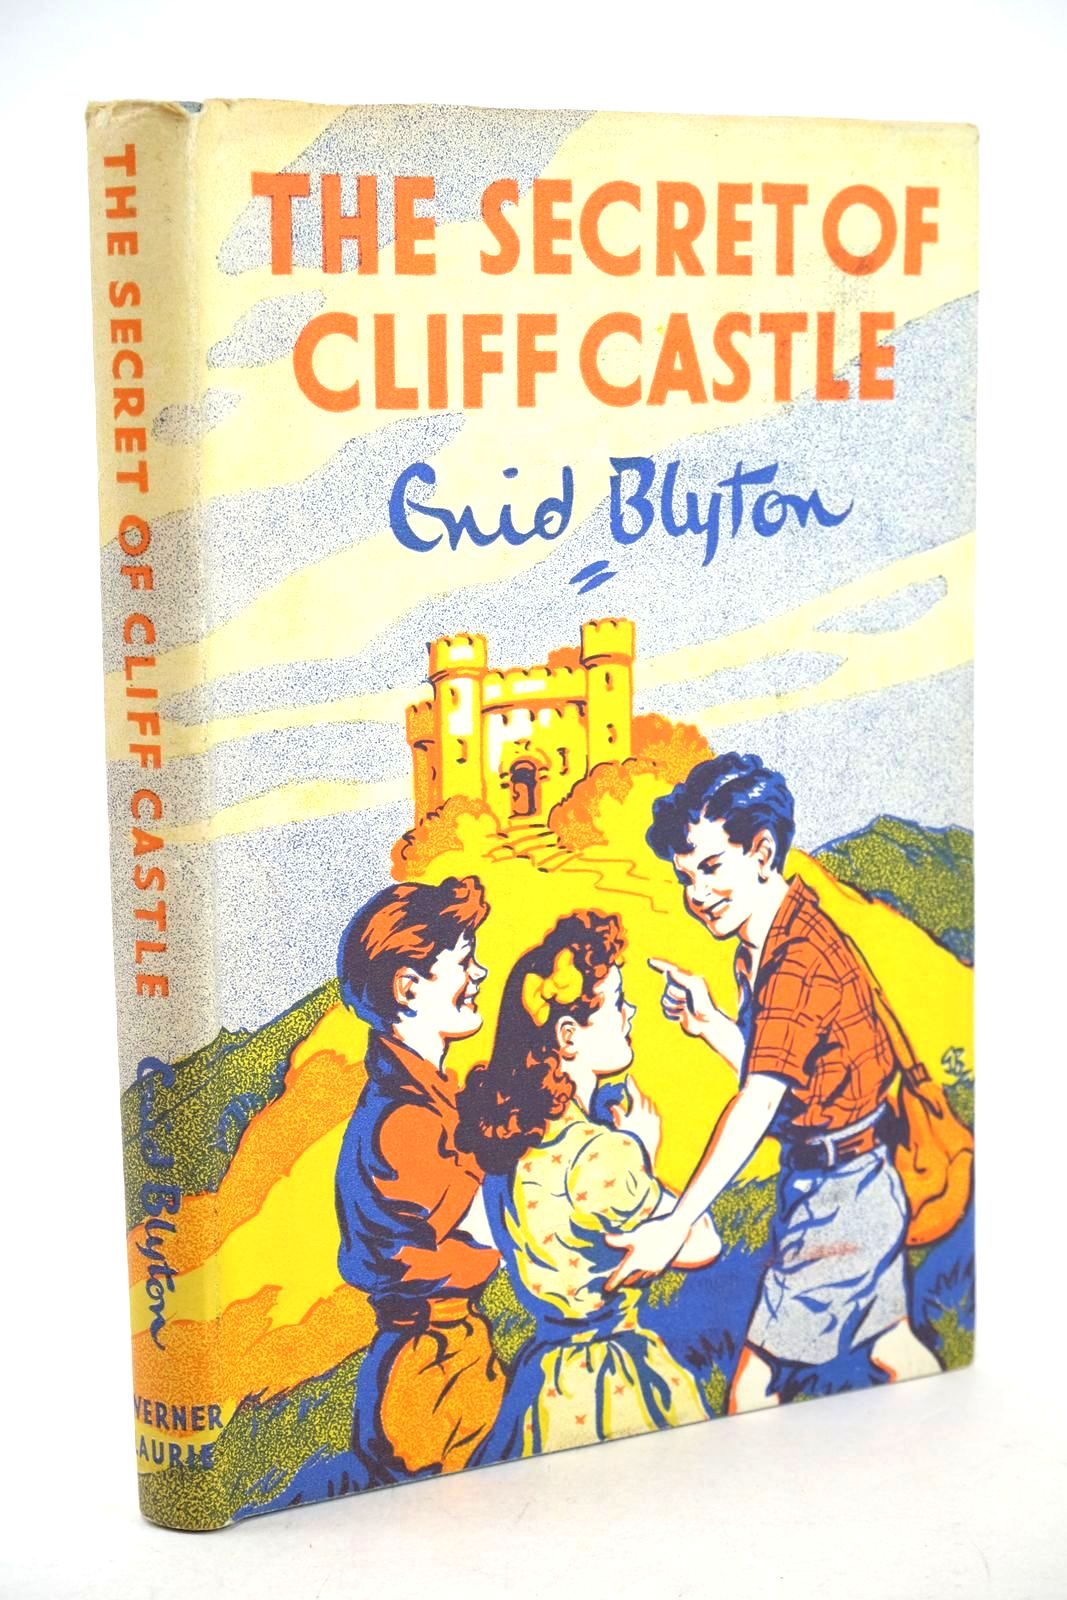 Photo of THE SECRET OF CLIFF CASTLE written by Blyton, Enid Pollock, Mary illustrated by Brook, G. published by Werner Laurie (STOCK CODE: 1326784)  for sale by Stella & Rose's Books